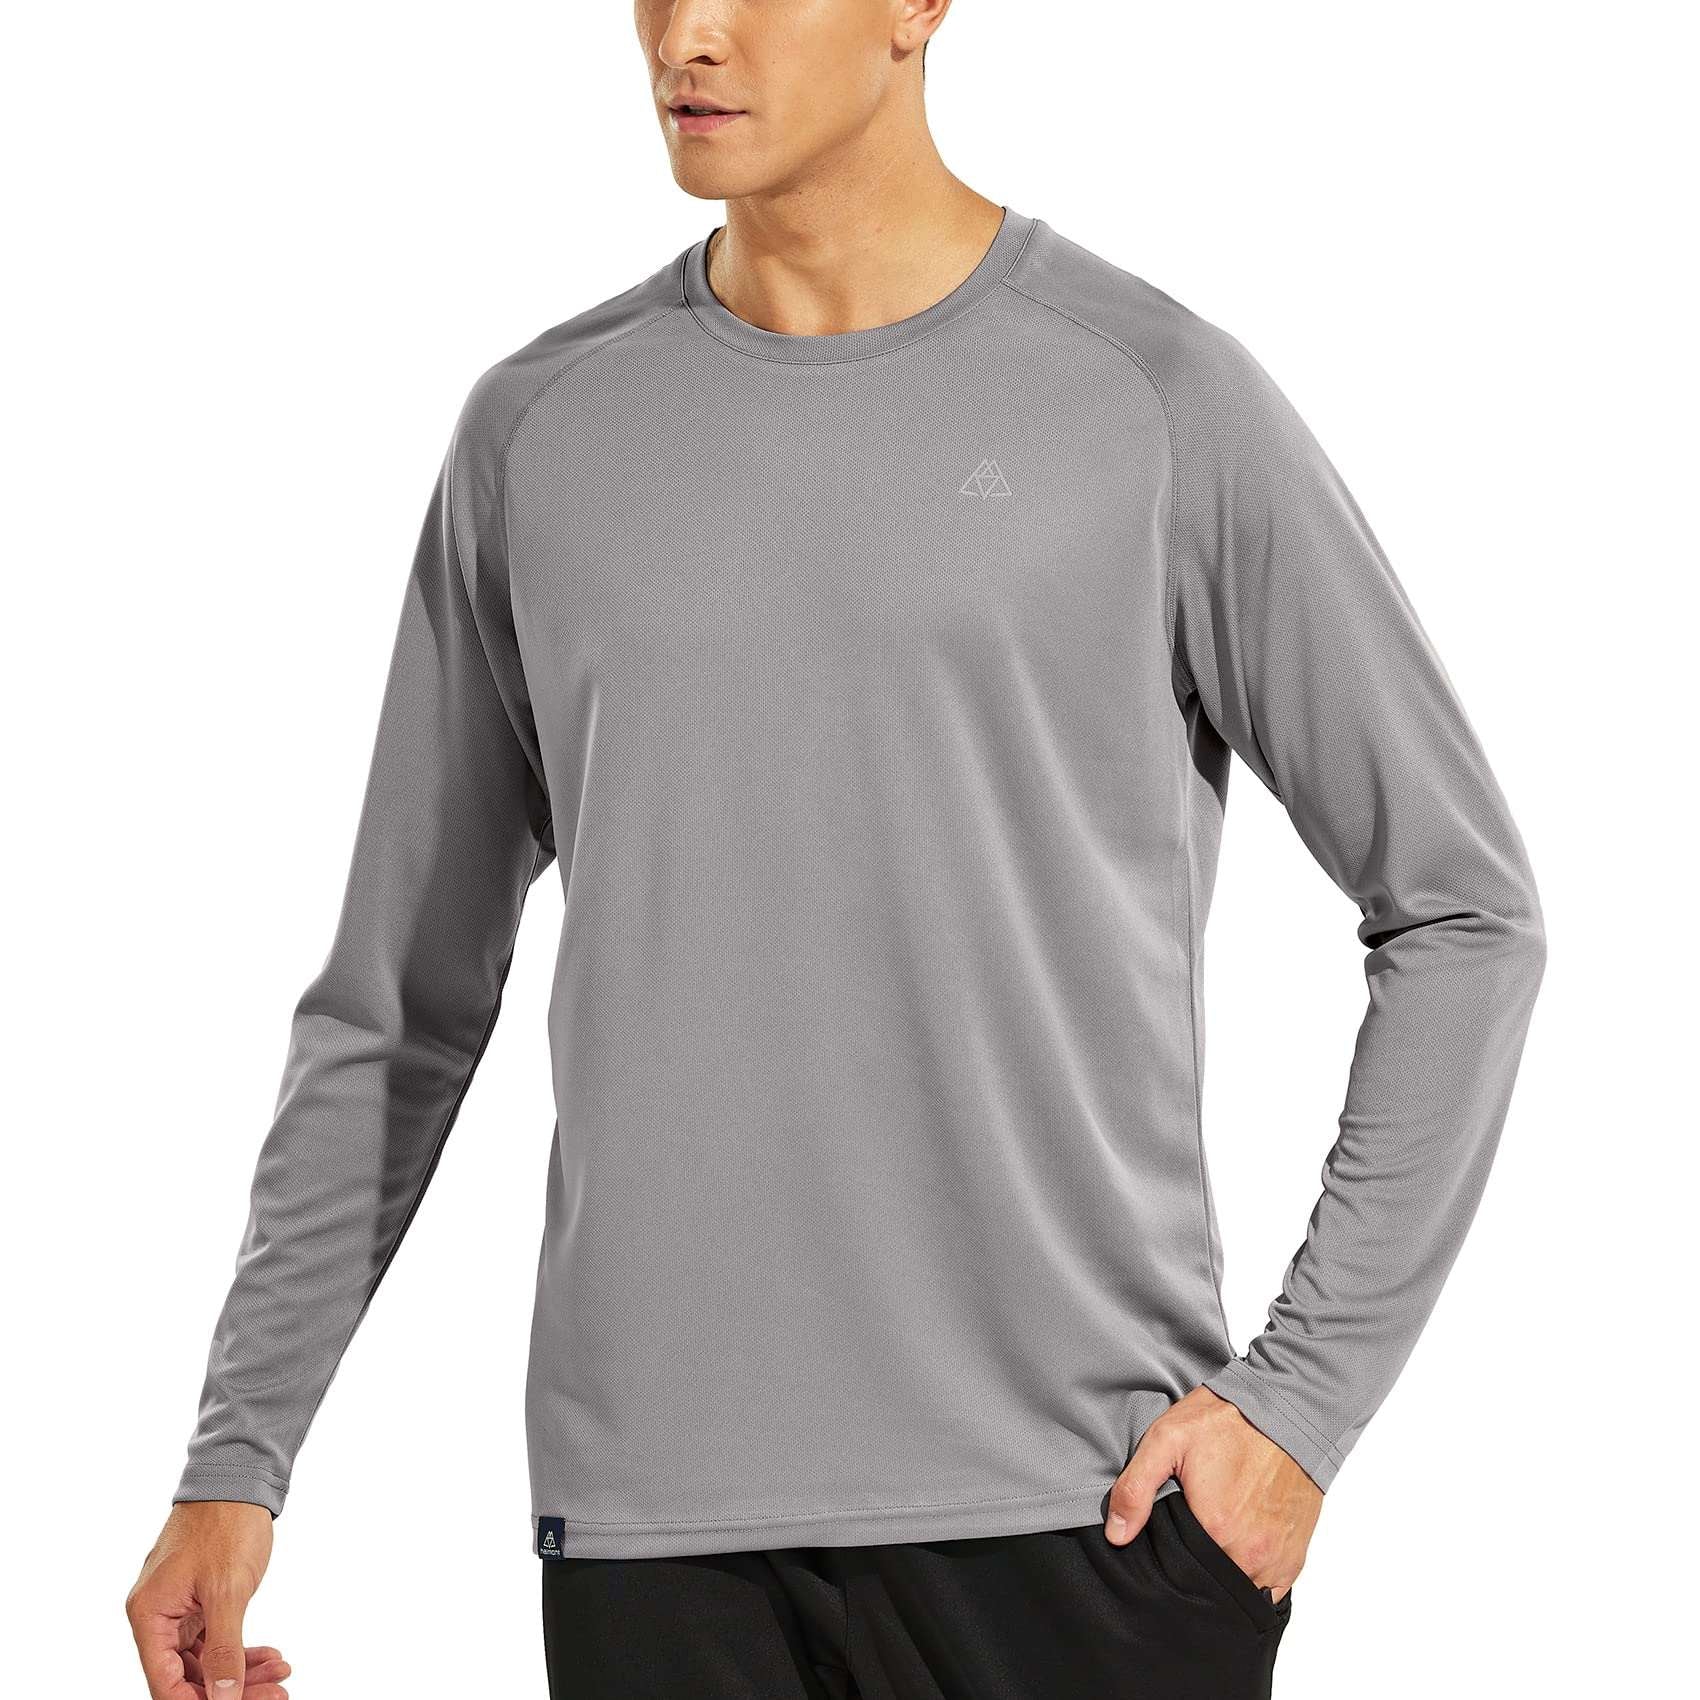 Men’s Dry Fit Athletic Shirts Running Workout T-Shirts, Dark Grey / S